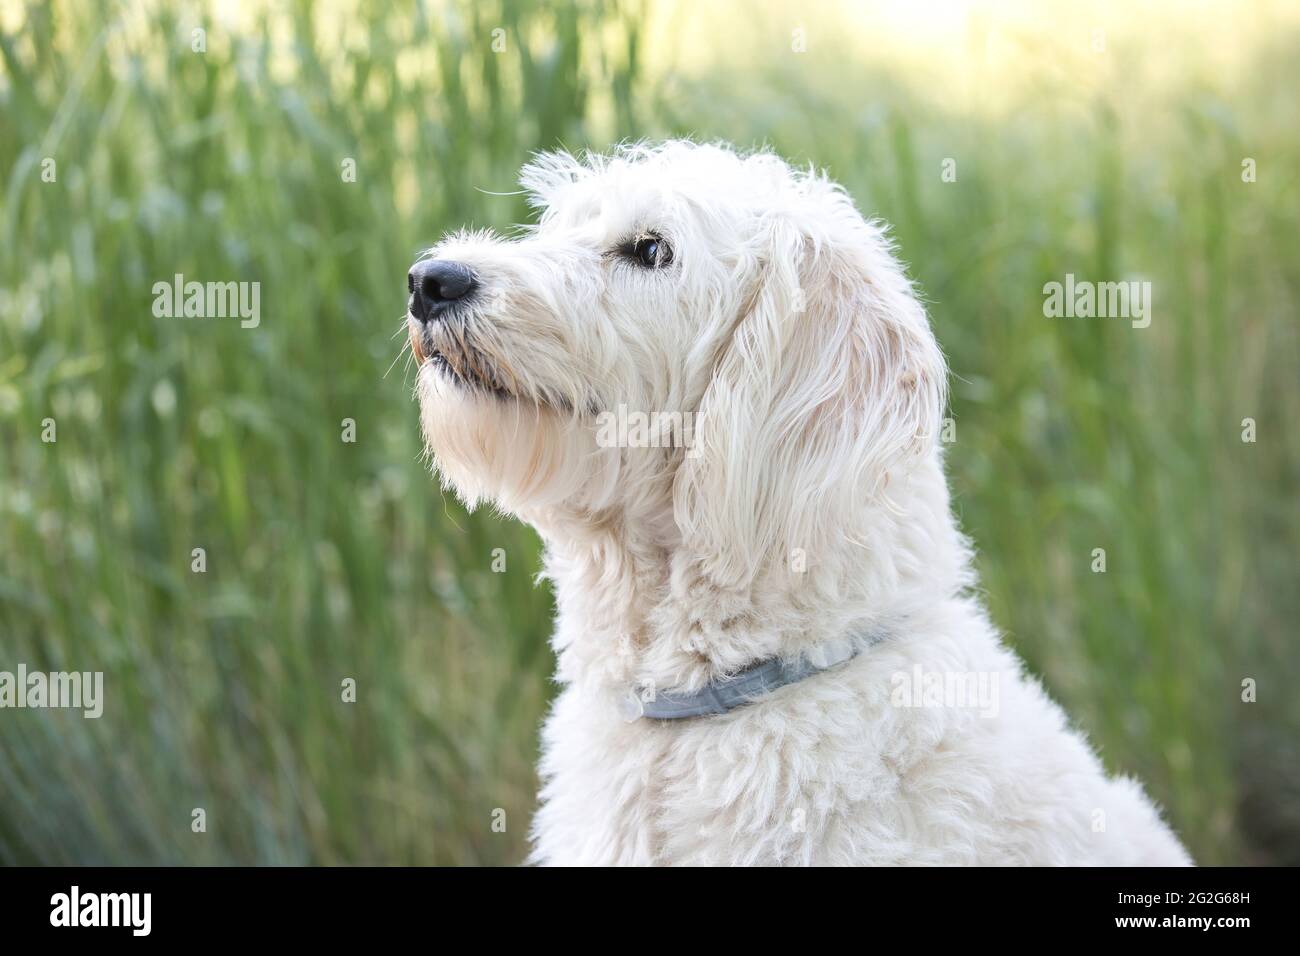 A close-up side-view portrait of white labradoodle sitting in grass Stock Photo